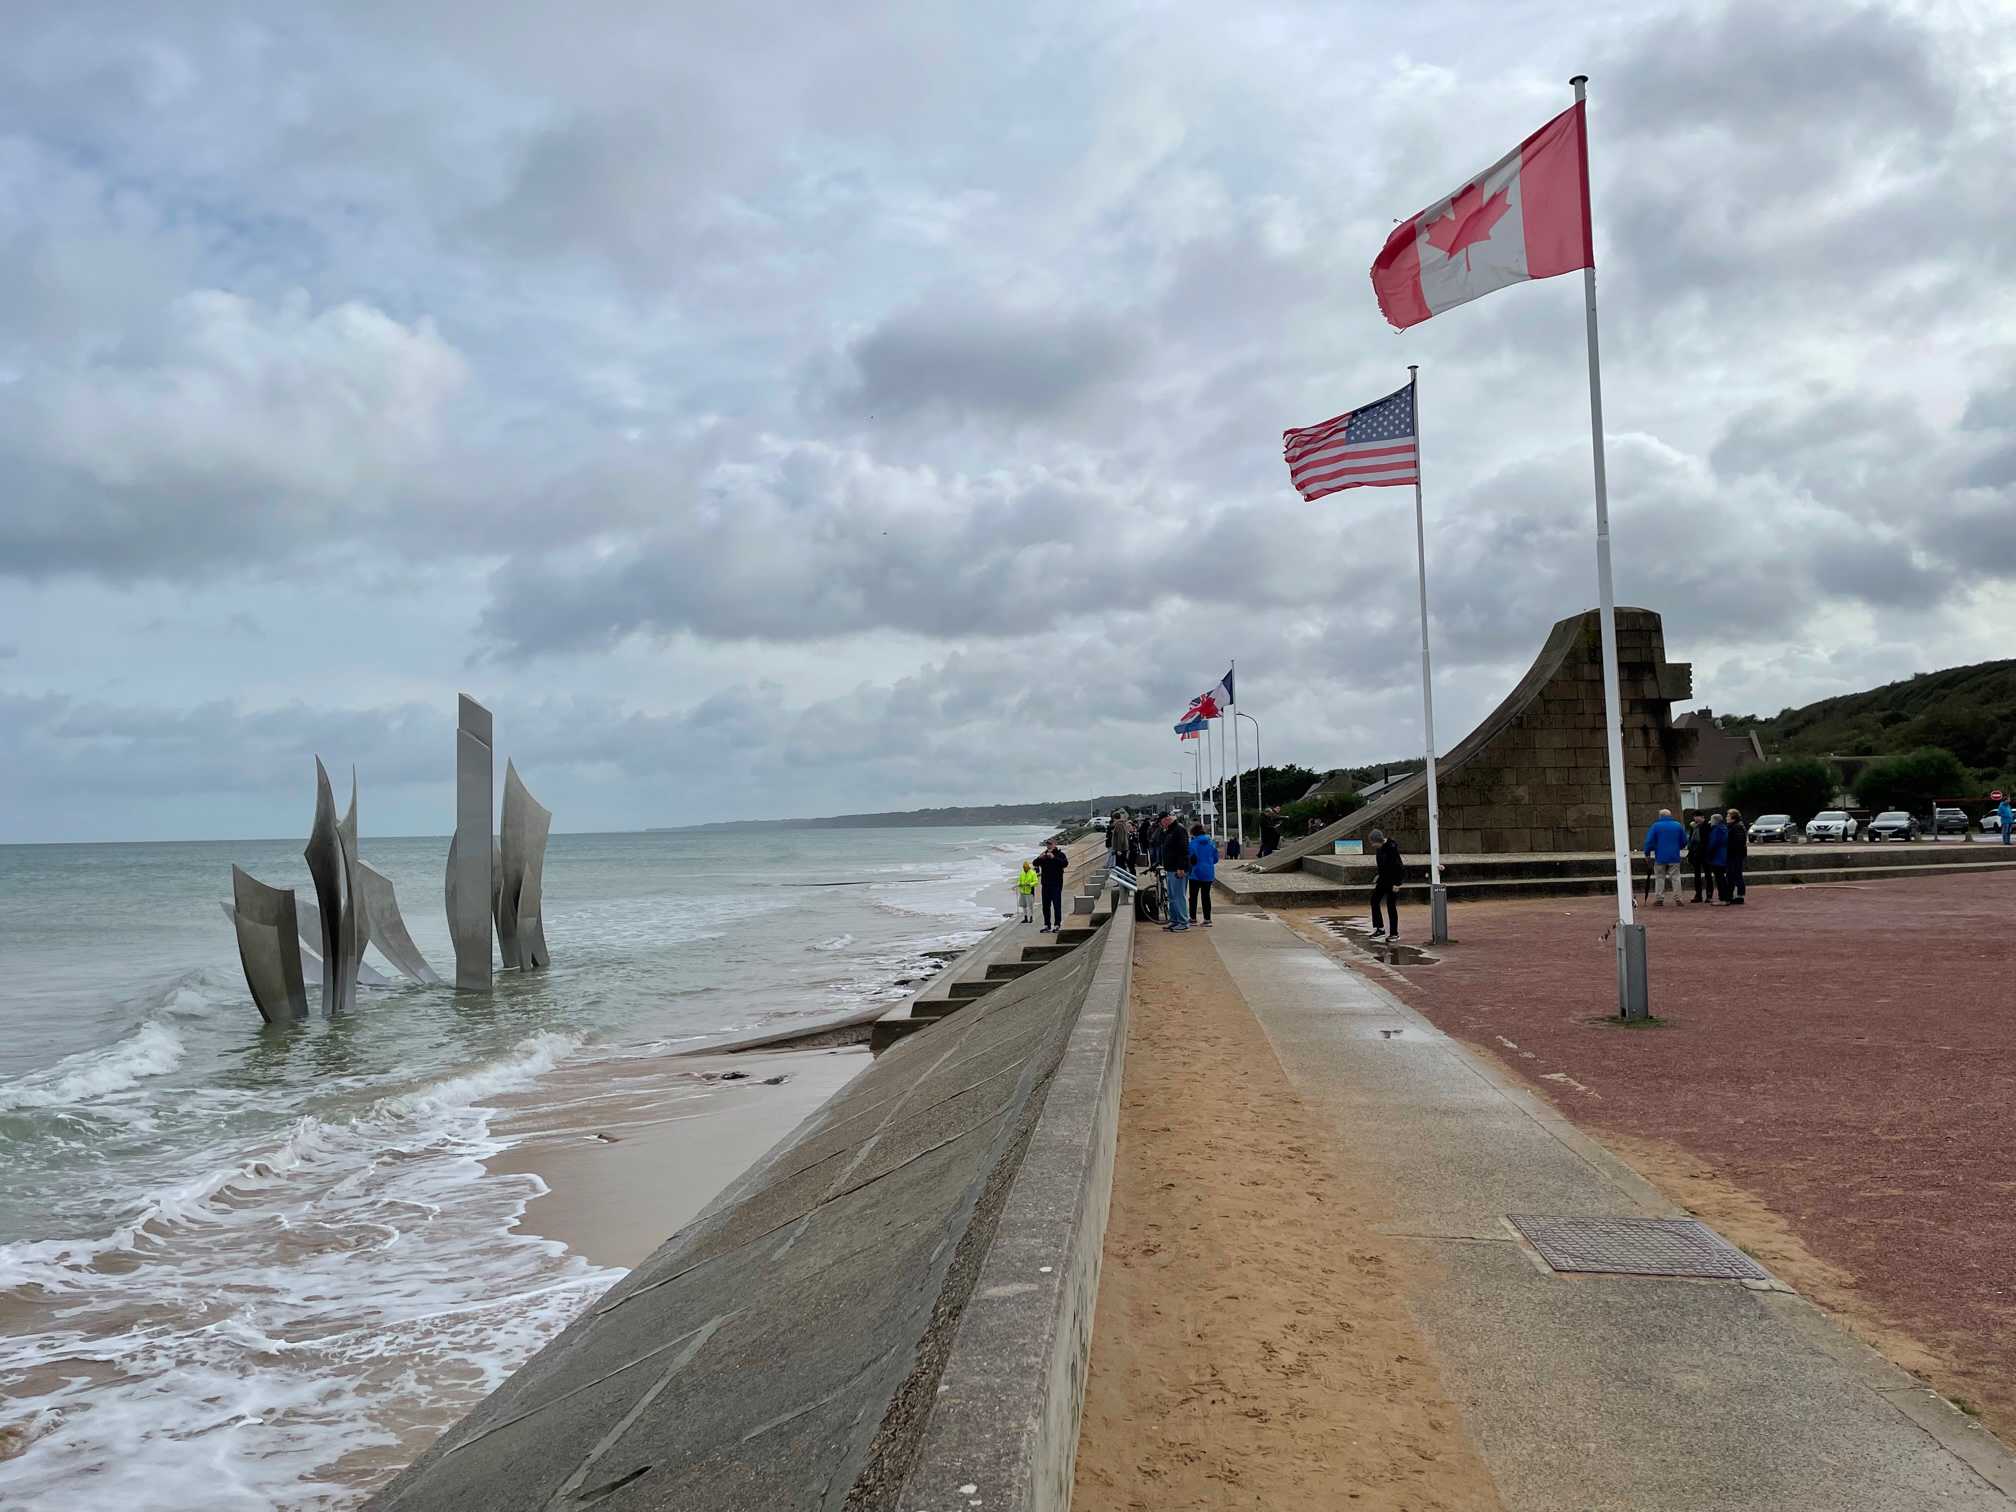 On Tauck River Cruies: Visiting one of the D-Day memorials along Normandy beaches